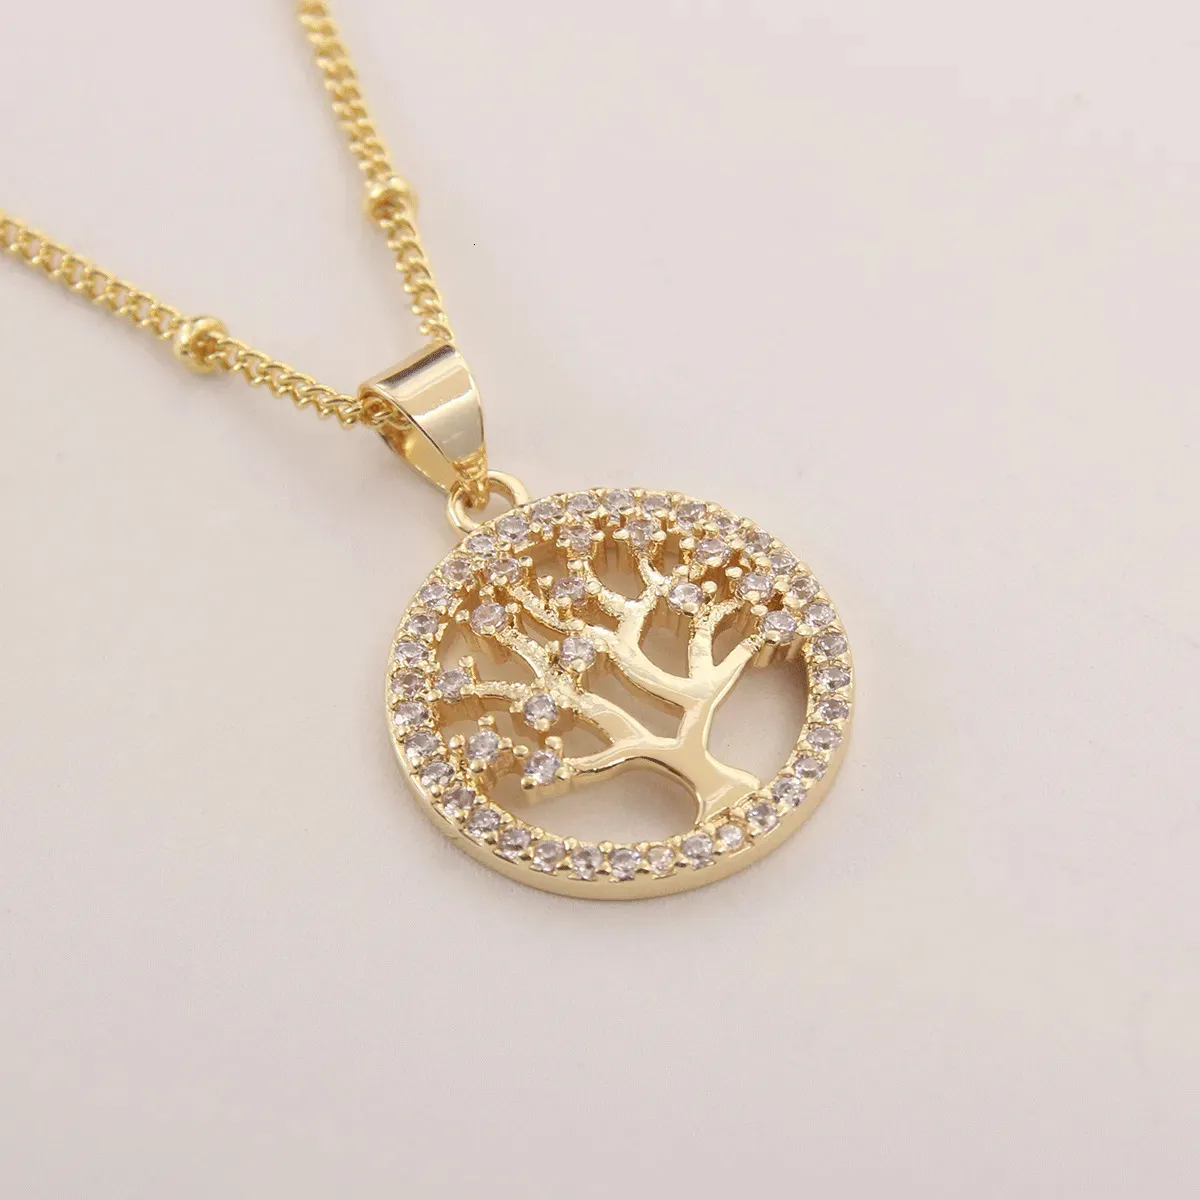 Pendanthalsband MHS Sun Fashion Copper Tree of Life Inlay Zircon Chain Women Cz Gold Color Halsband Girls Holiday Jewelry Gift 230928